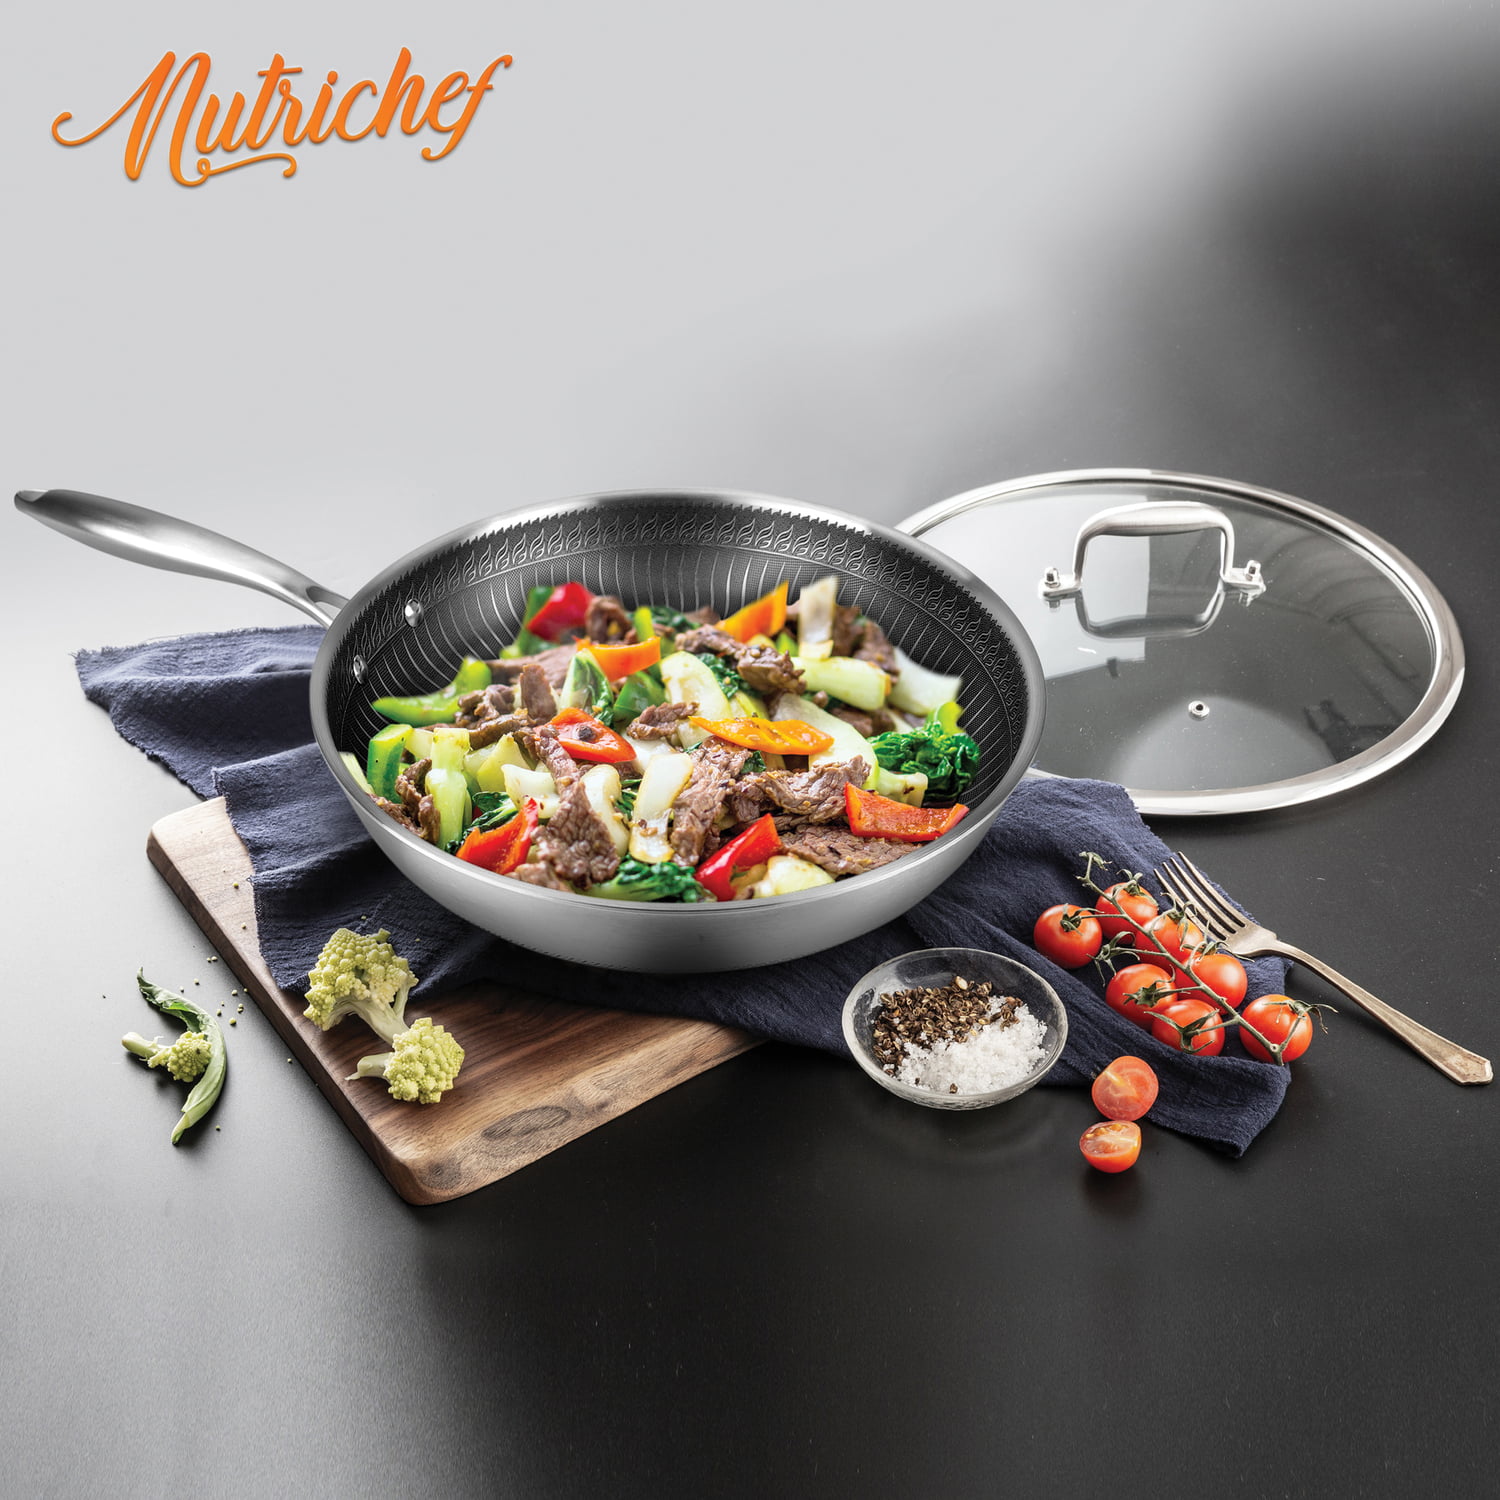 Nutrichef 3 Piece Tri Ply Stainless Steel Fry Pan Set - 20835805